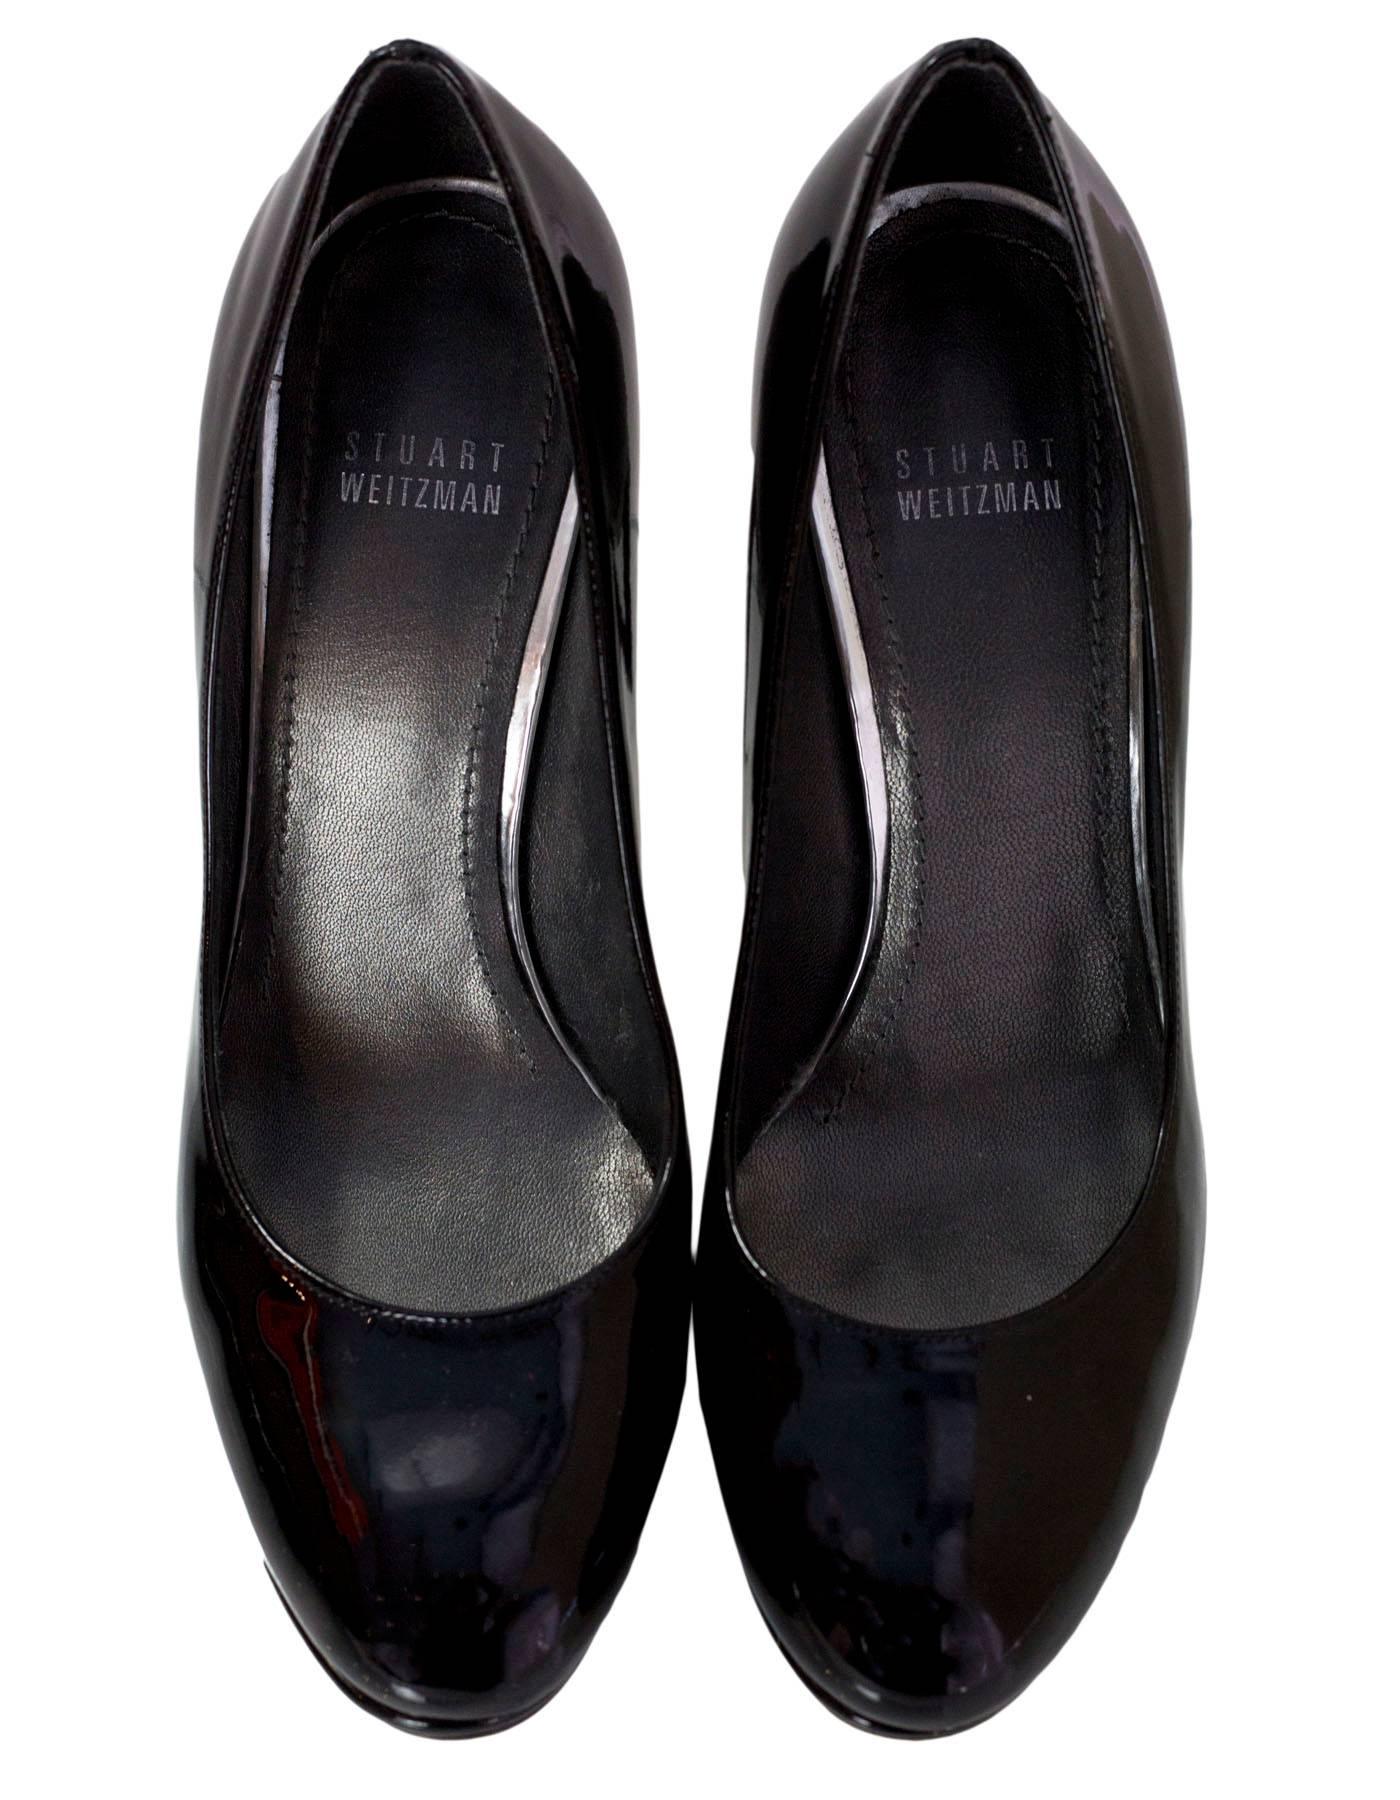 Stuart Weitzman Black Patent Pumps Sz 7.5D In Excellent Condition In New York, NY